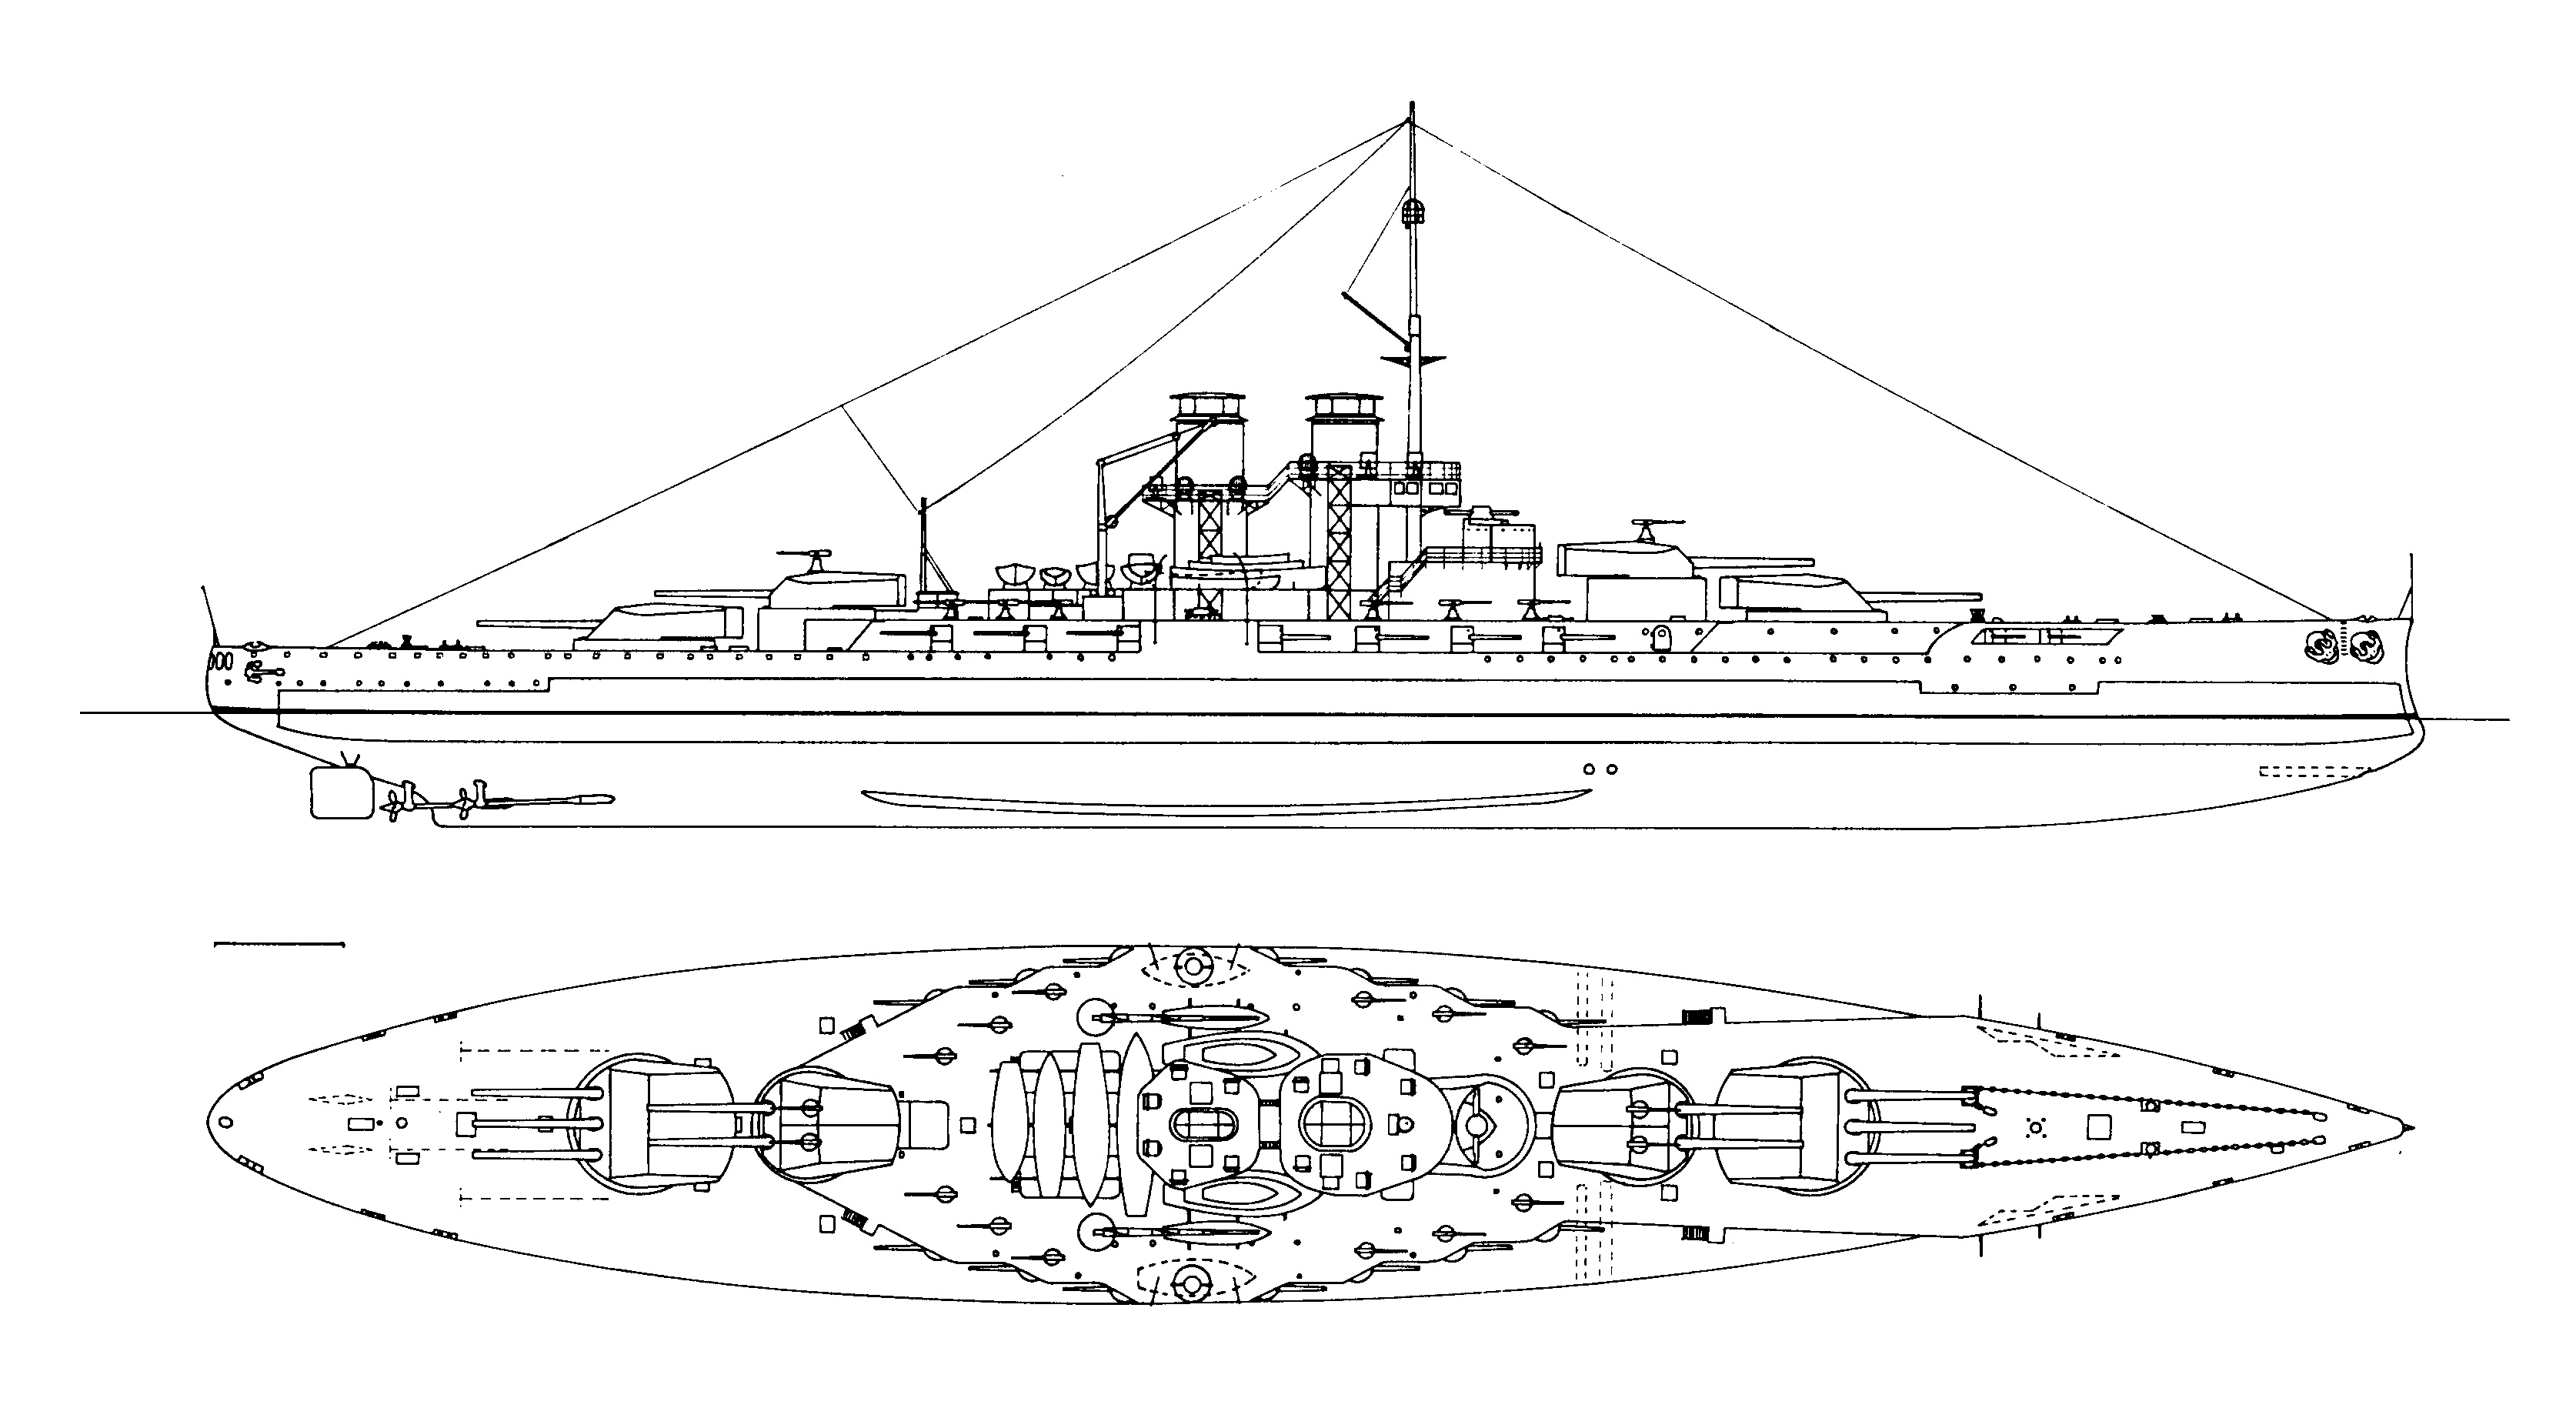 The last approved design of the improved TEGETTHOFF-class dated July 1914 

